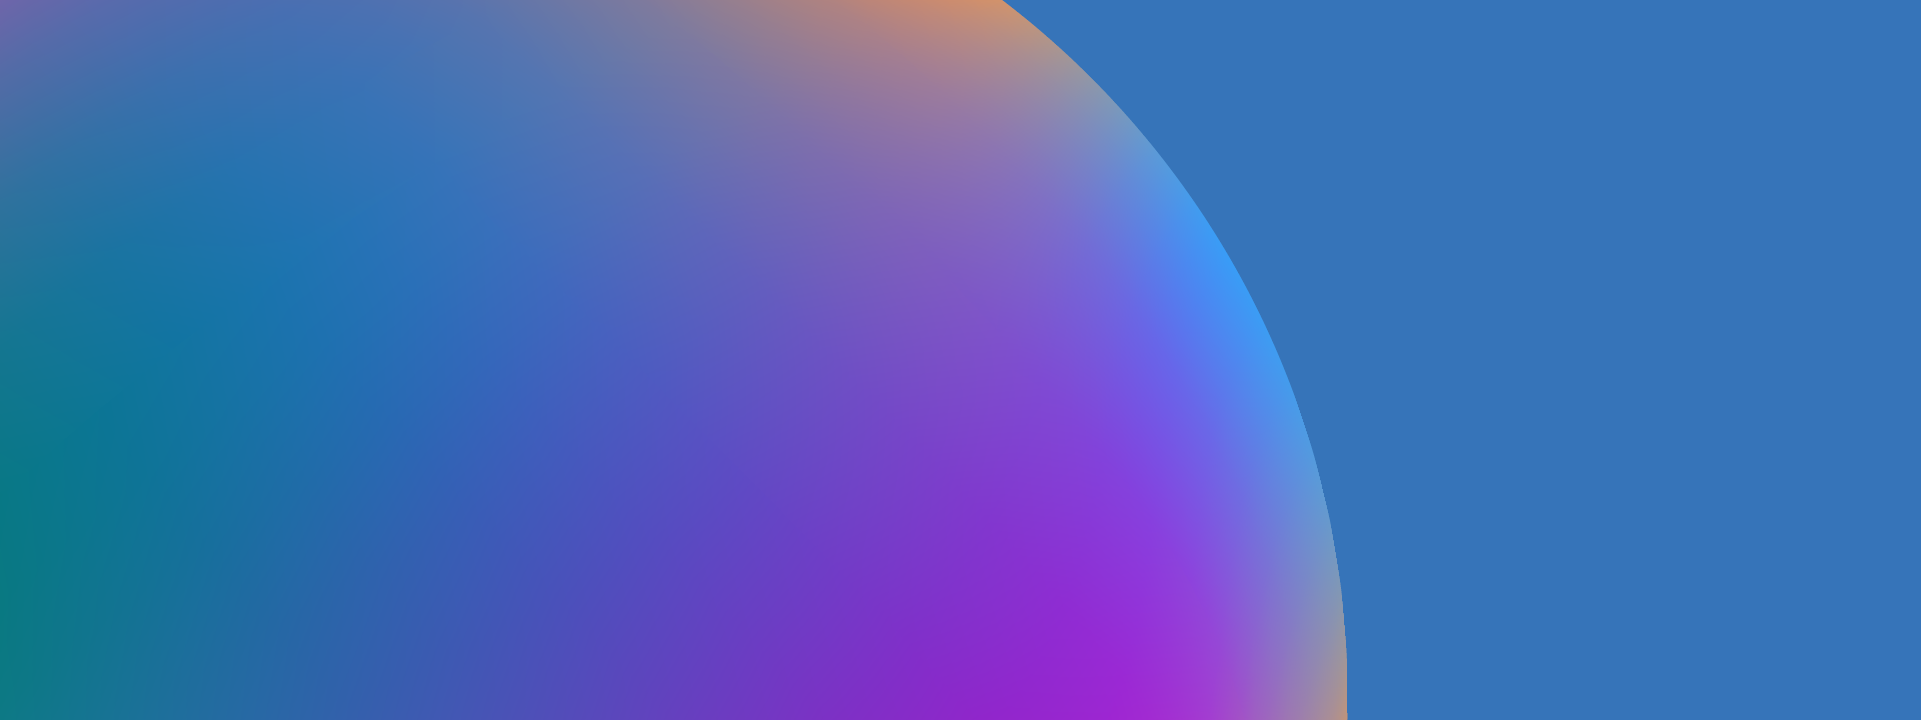 WSDM 2022 event header: abstract spherical graphic